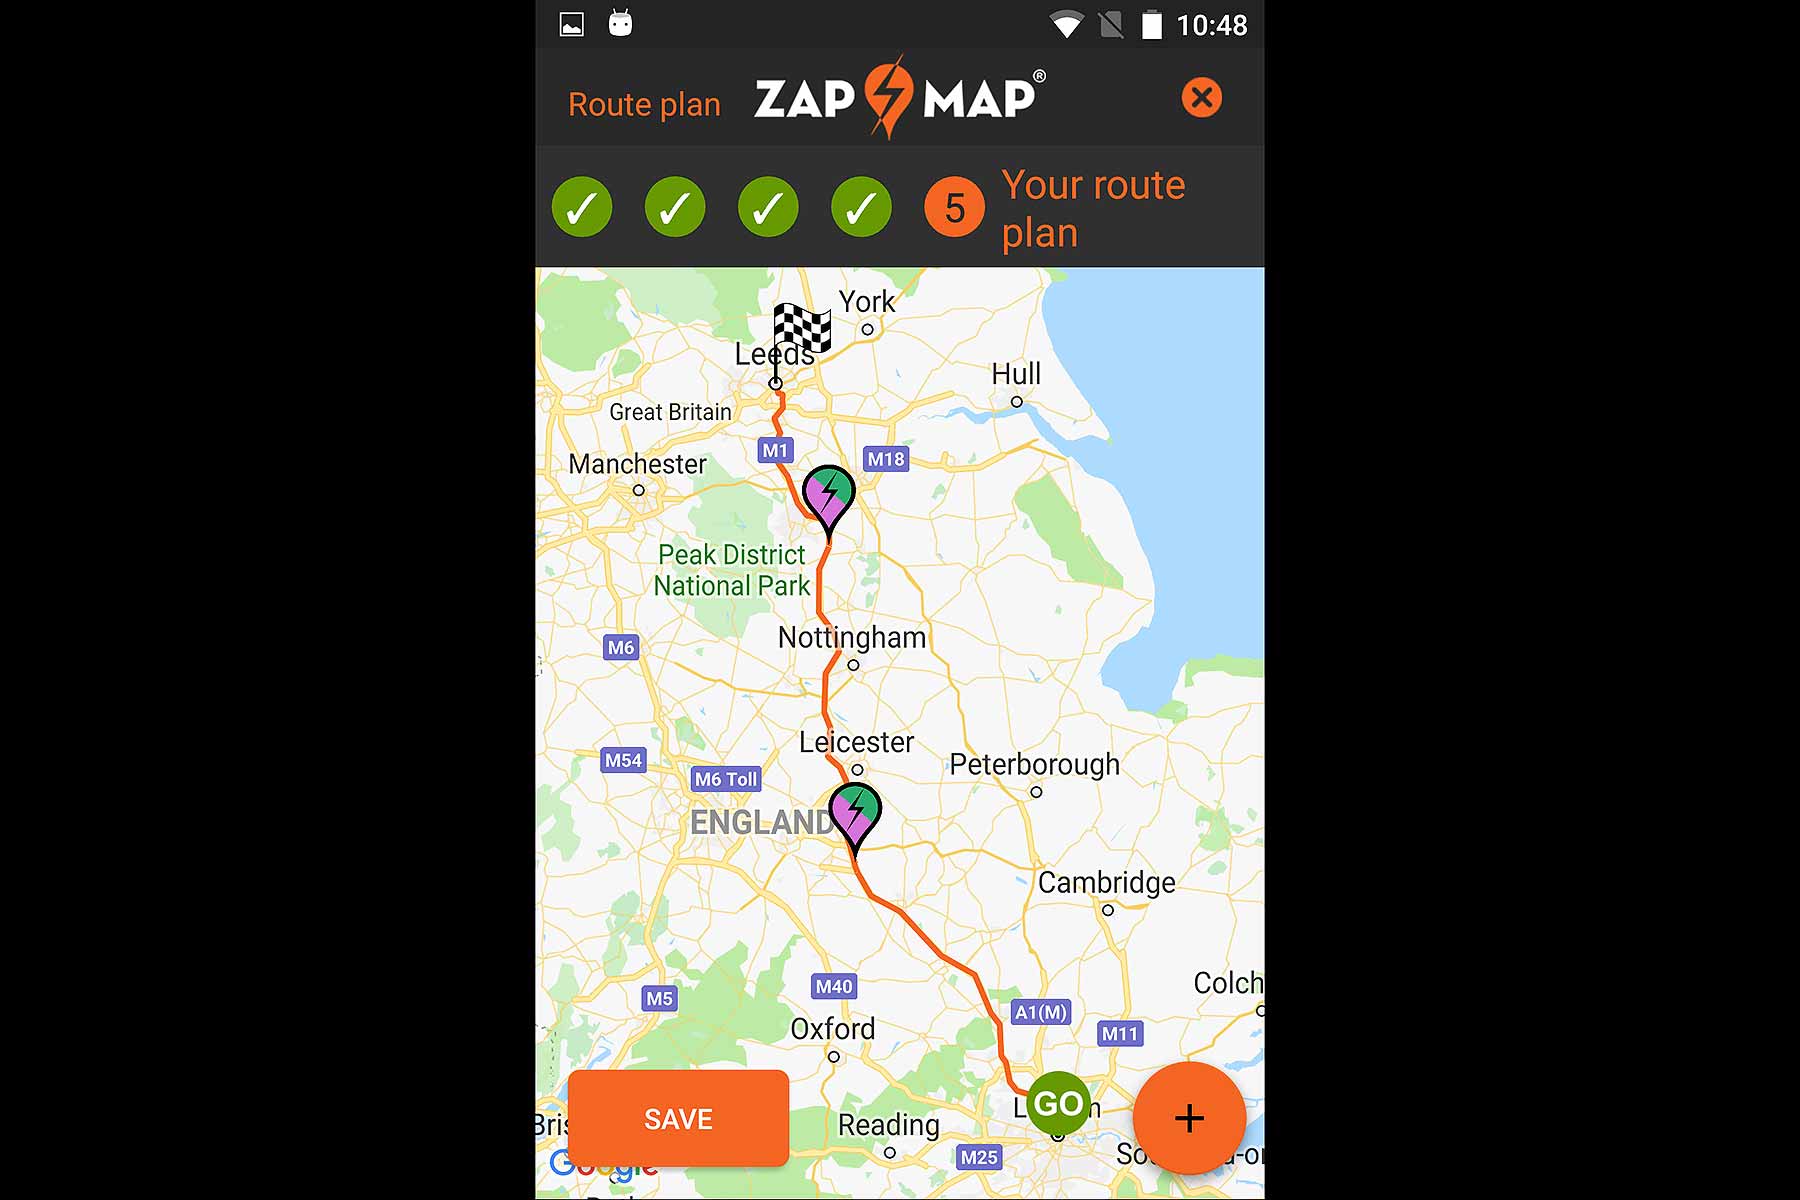 Zap-Map route planner